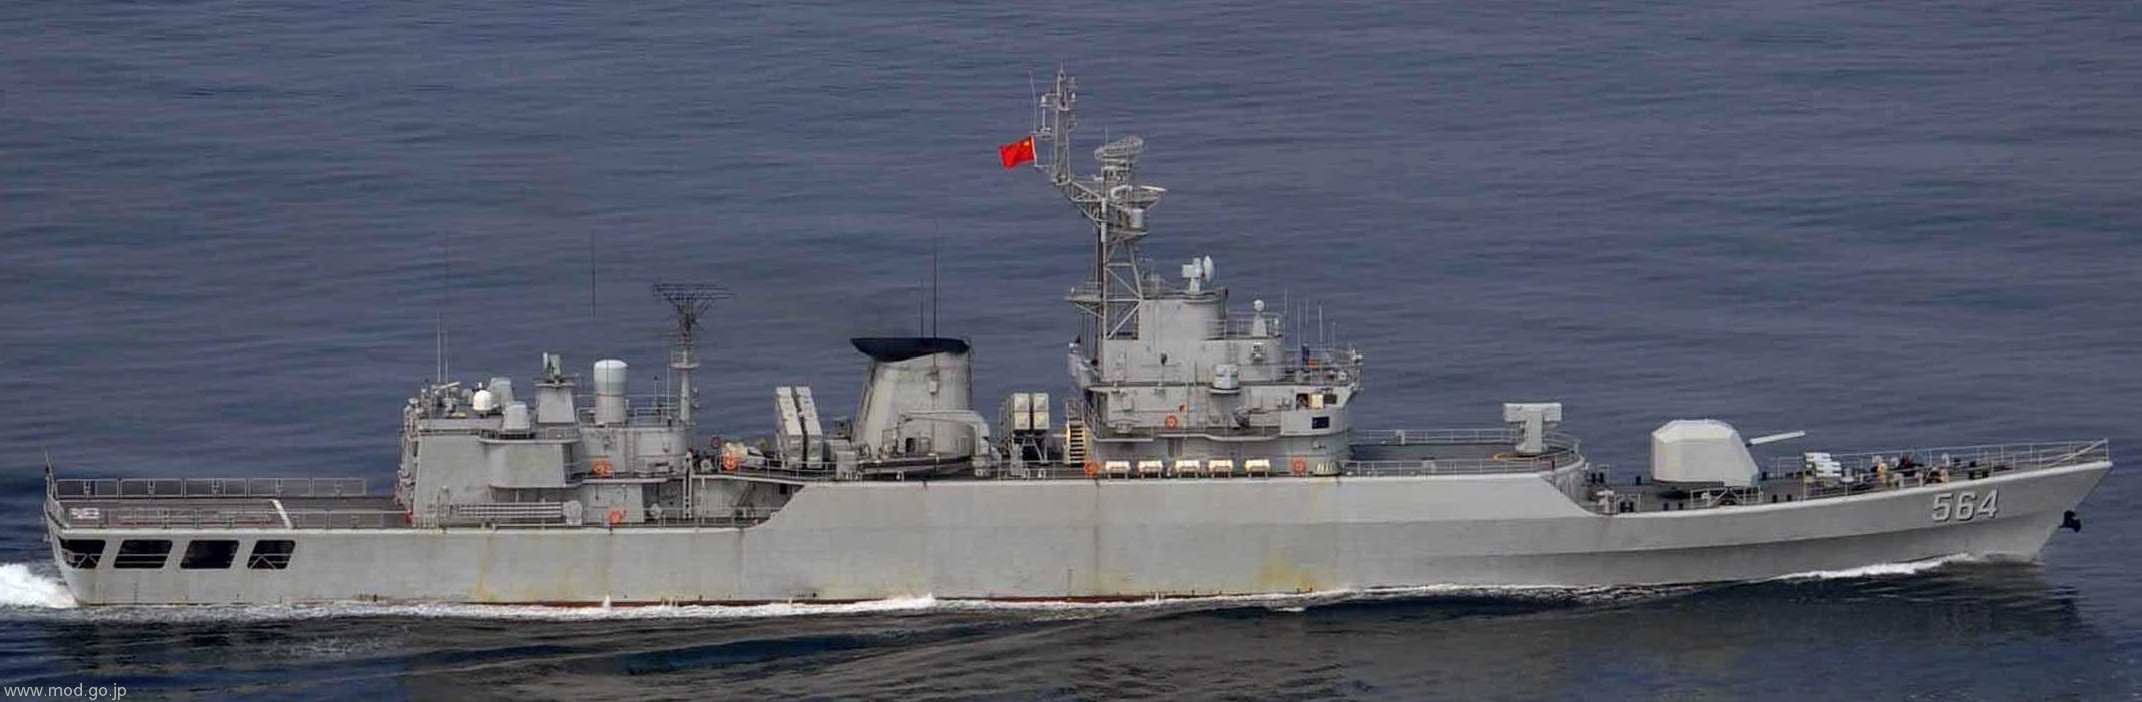 ffg-564 plans yichang type 053h3 jiangwei ii class guided missile frigate people's liberation army navy china 02